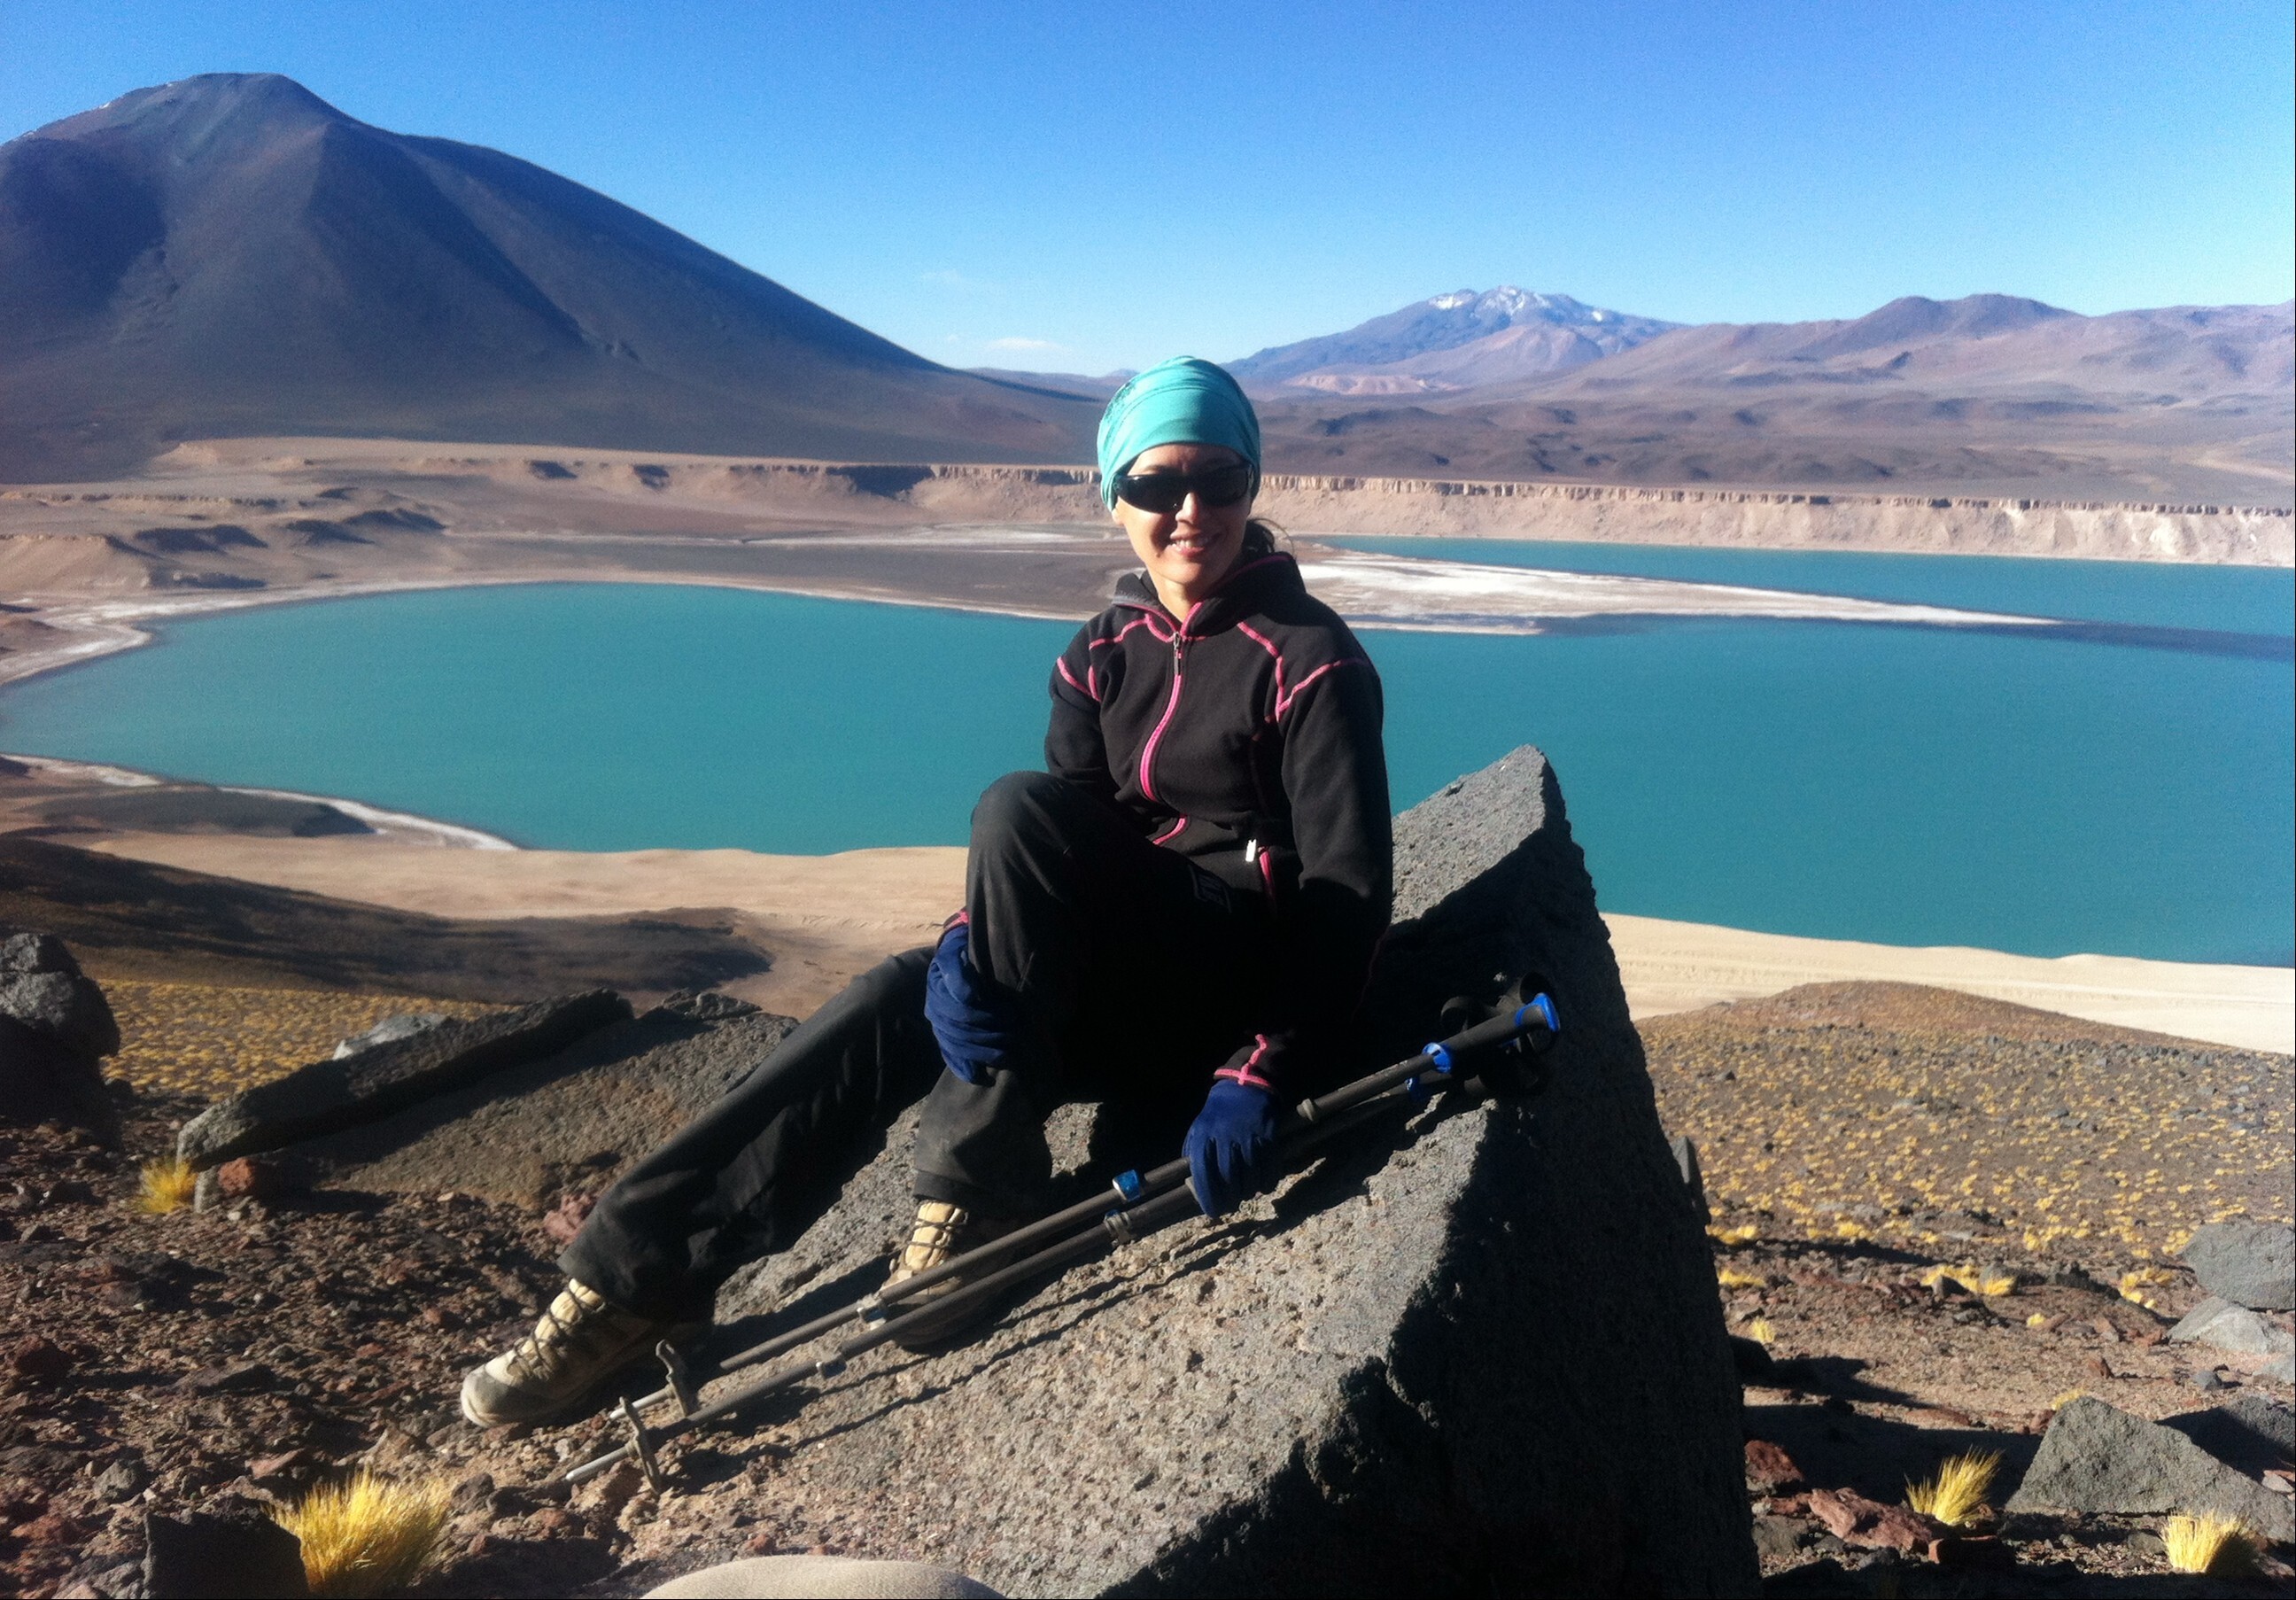 Sophie Cairns on an acclimatisation hike near Ojos del Salado, Chile, in March 2014.